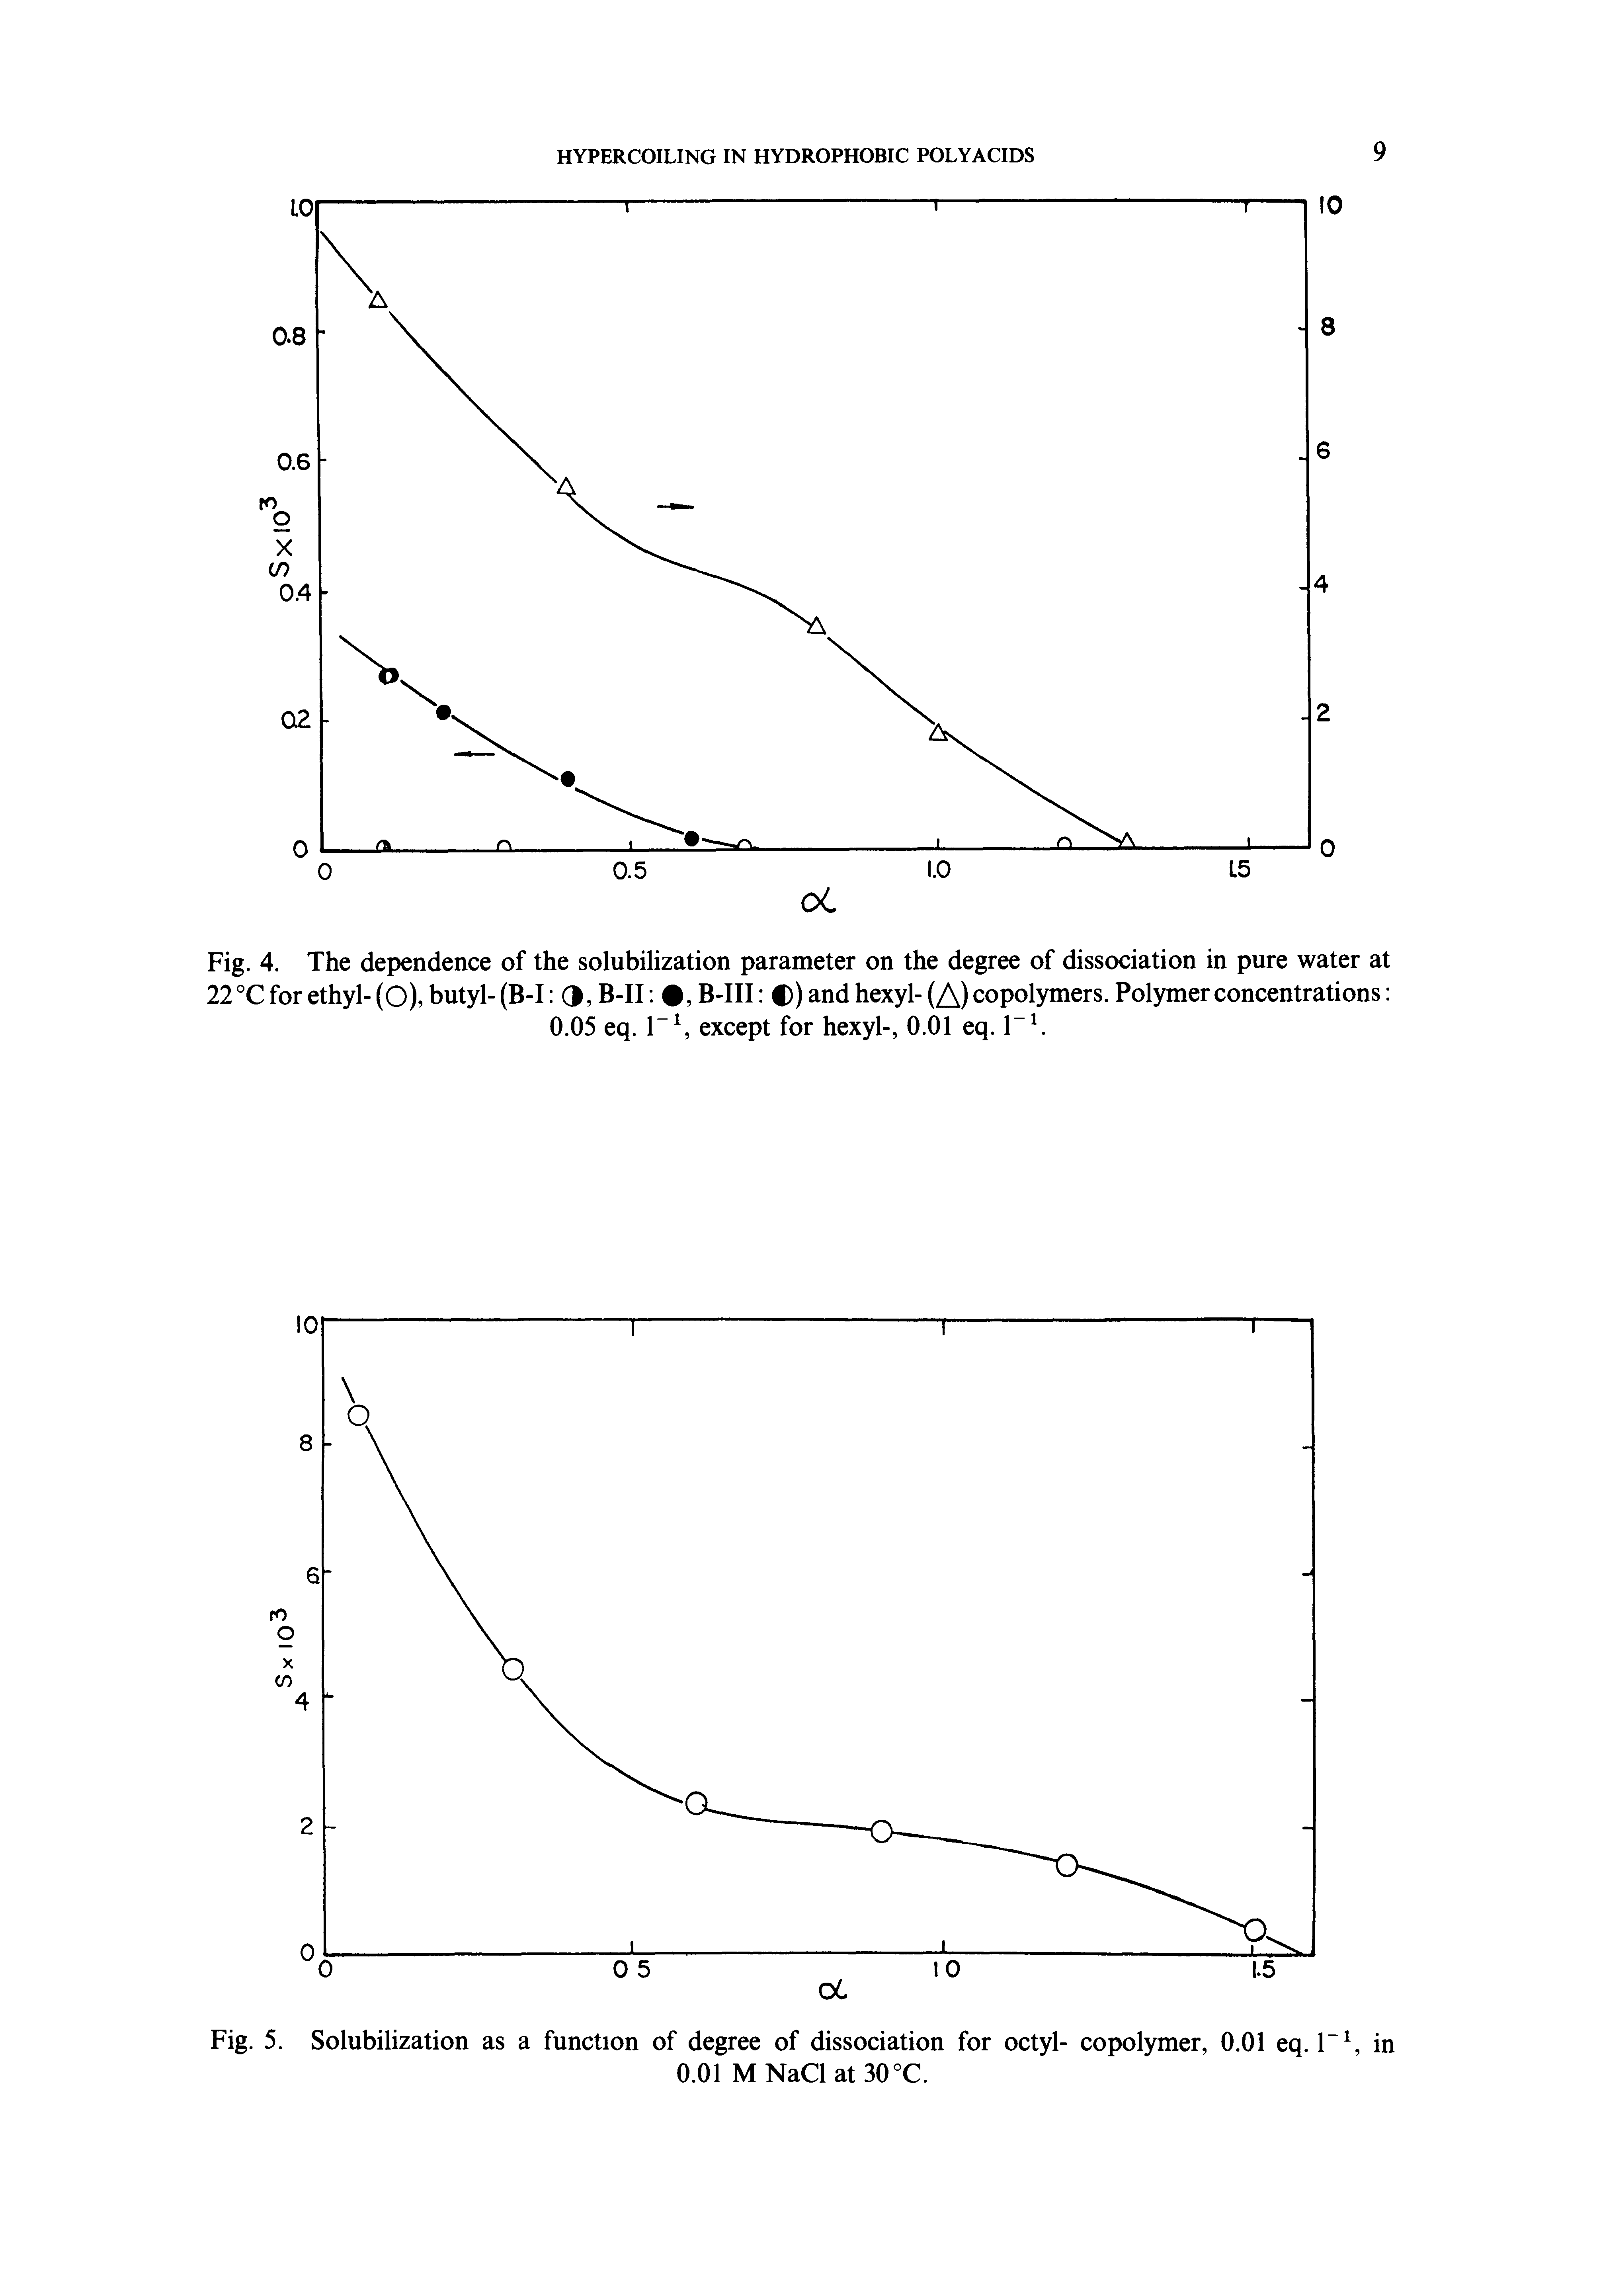 Fig. 4. The dependence of the solubilization parameter on the degree of dissociation in pure water at 22 °C for ethyl- (O), butyl- (B-1 3, B-II , B-III C) and hexyl- (A) copolymers. Polymer concentrations 0.05 eq. except for hexyl-, 0.01 eq.